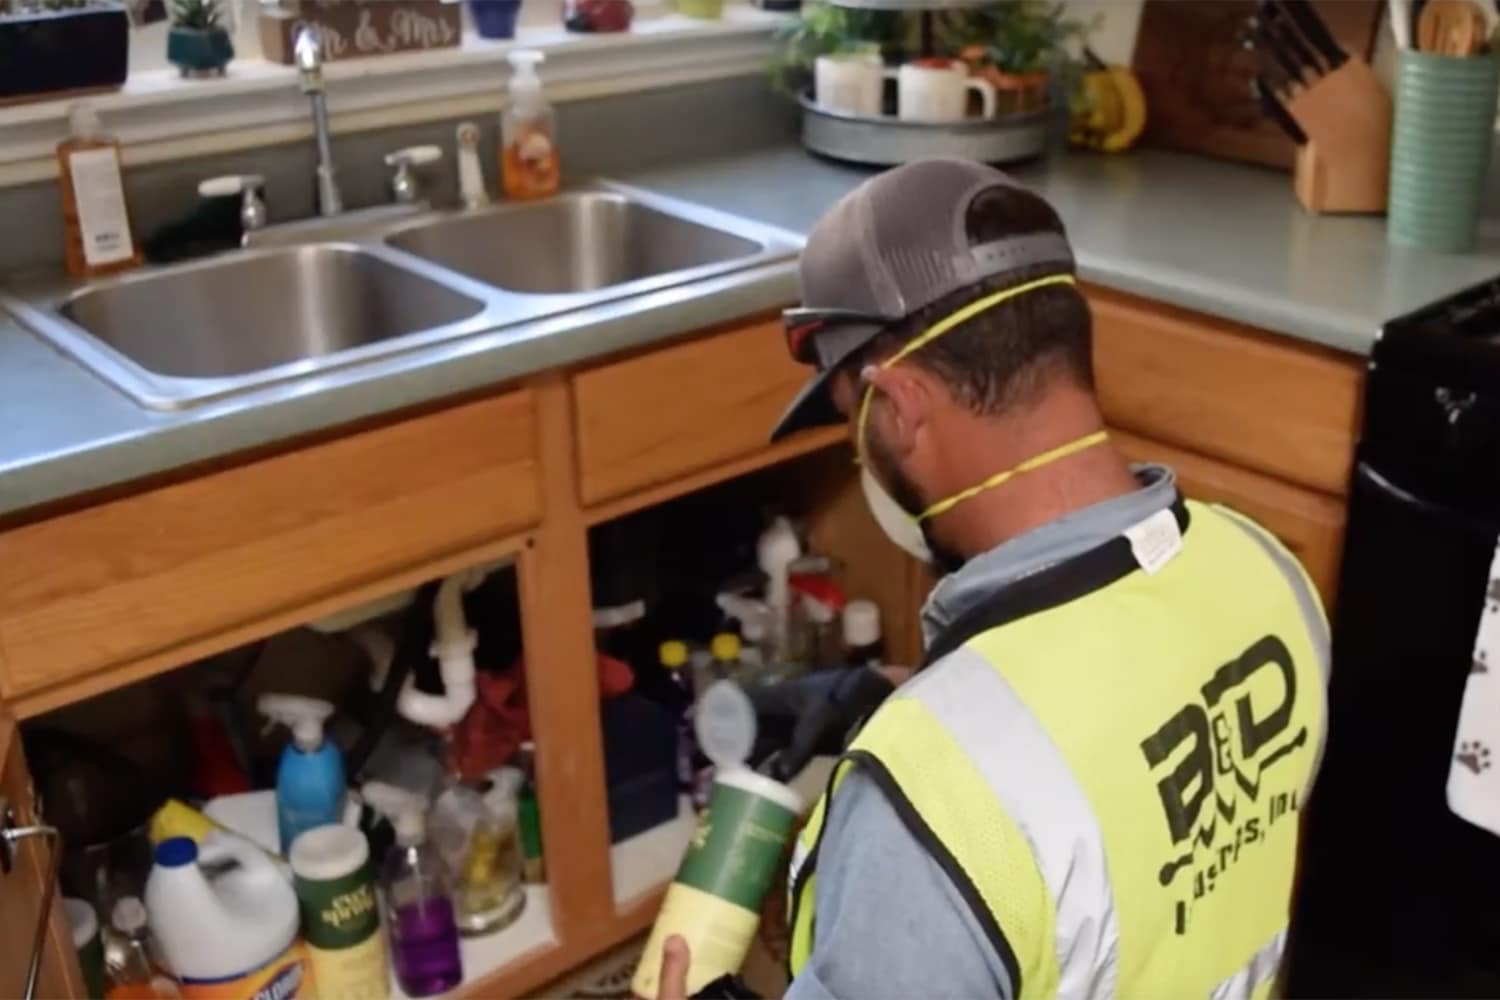 B&D Plumber Servicing a House During COVID-19 Outbreak